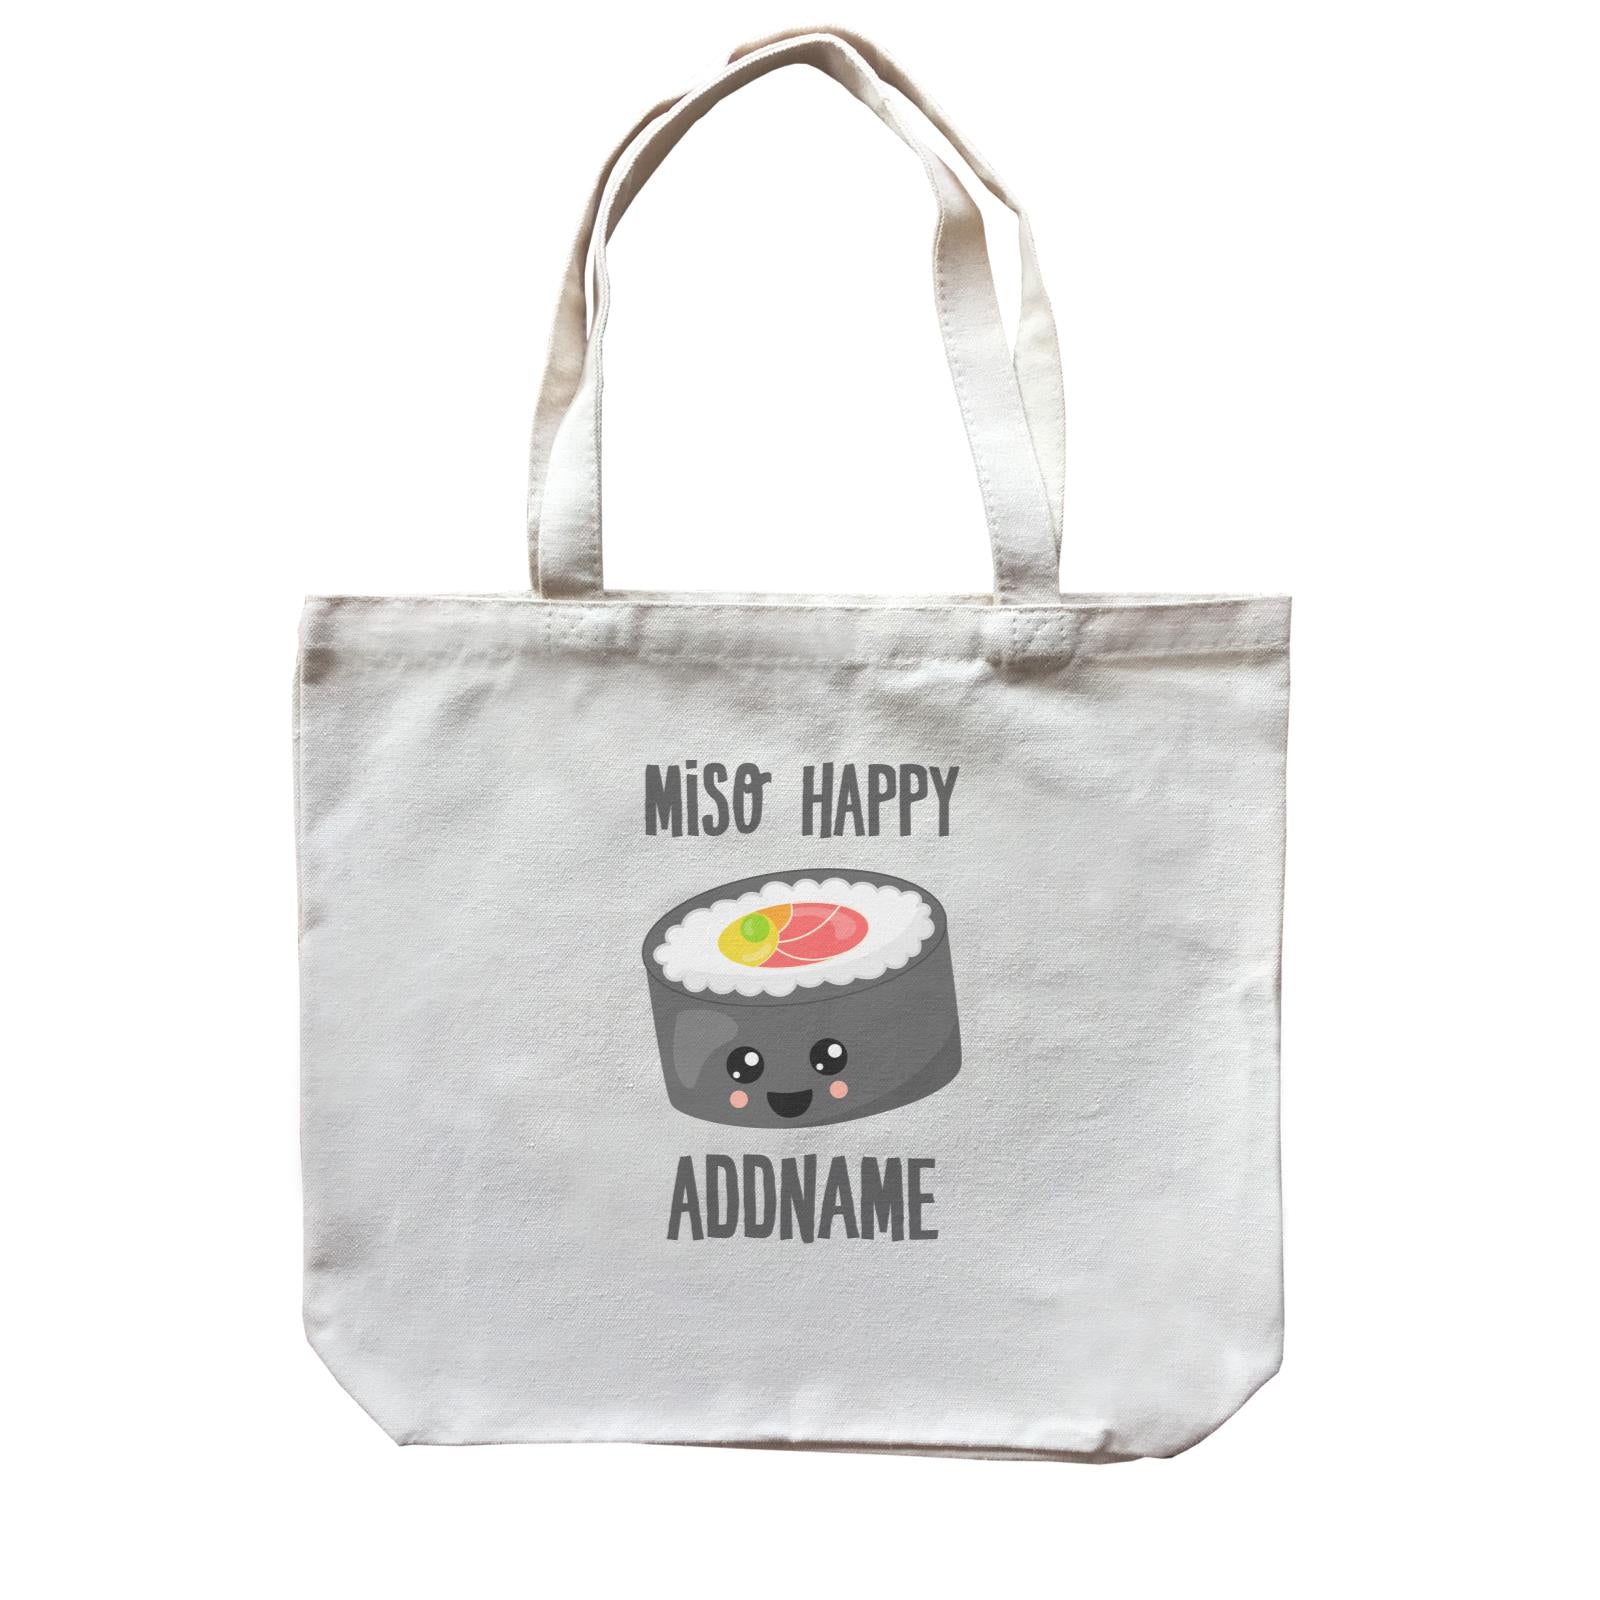 Miso Happy Sushi Circle Roll Addname Canvas Bag